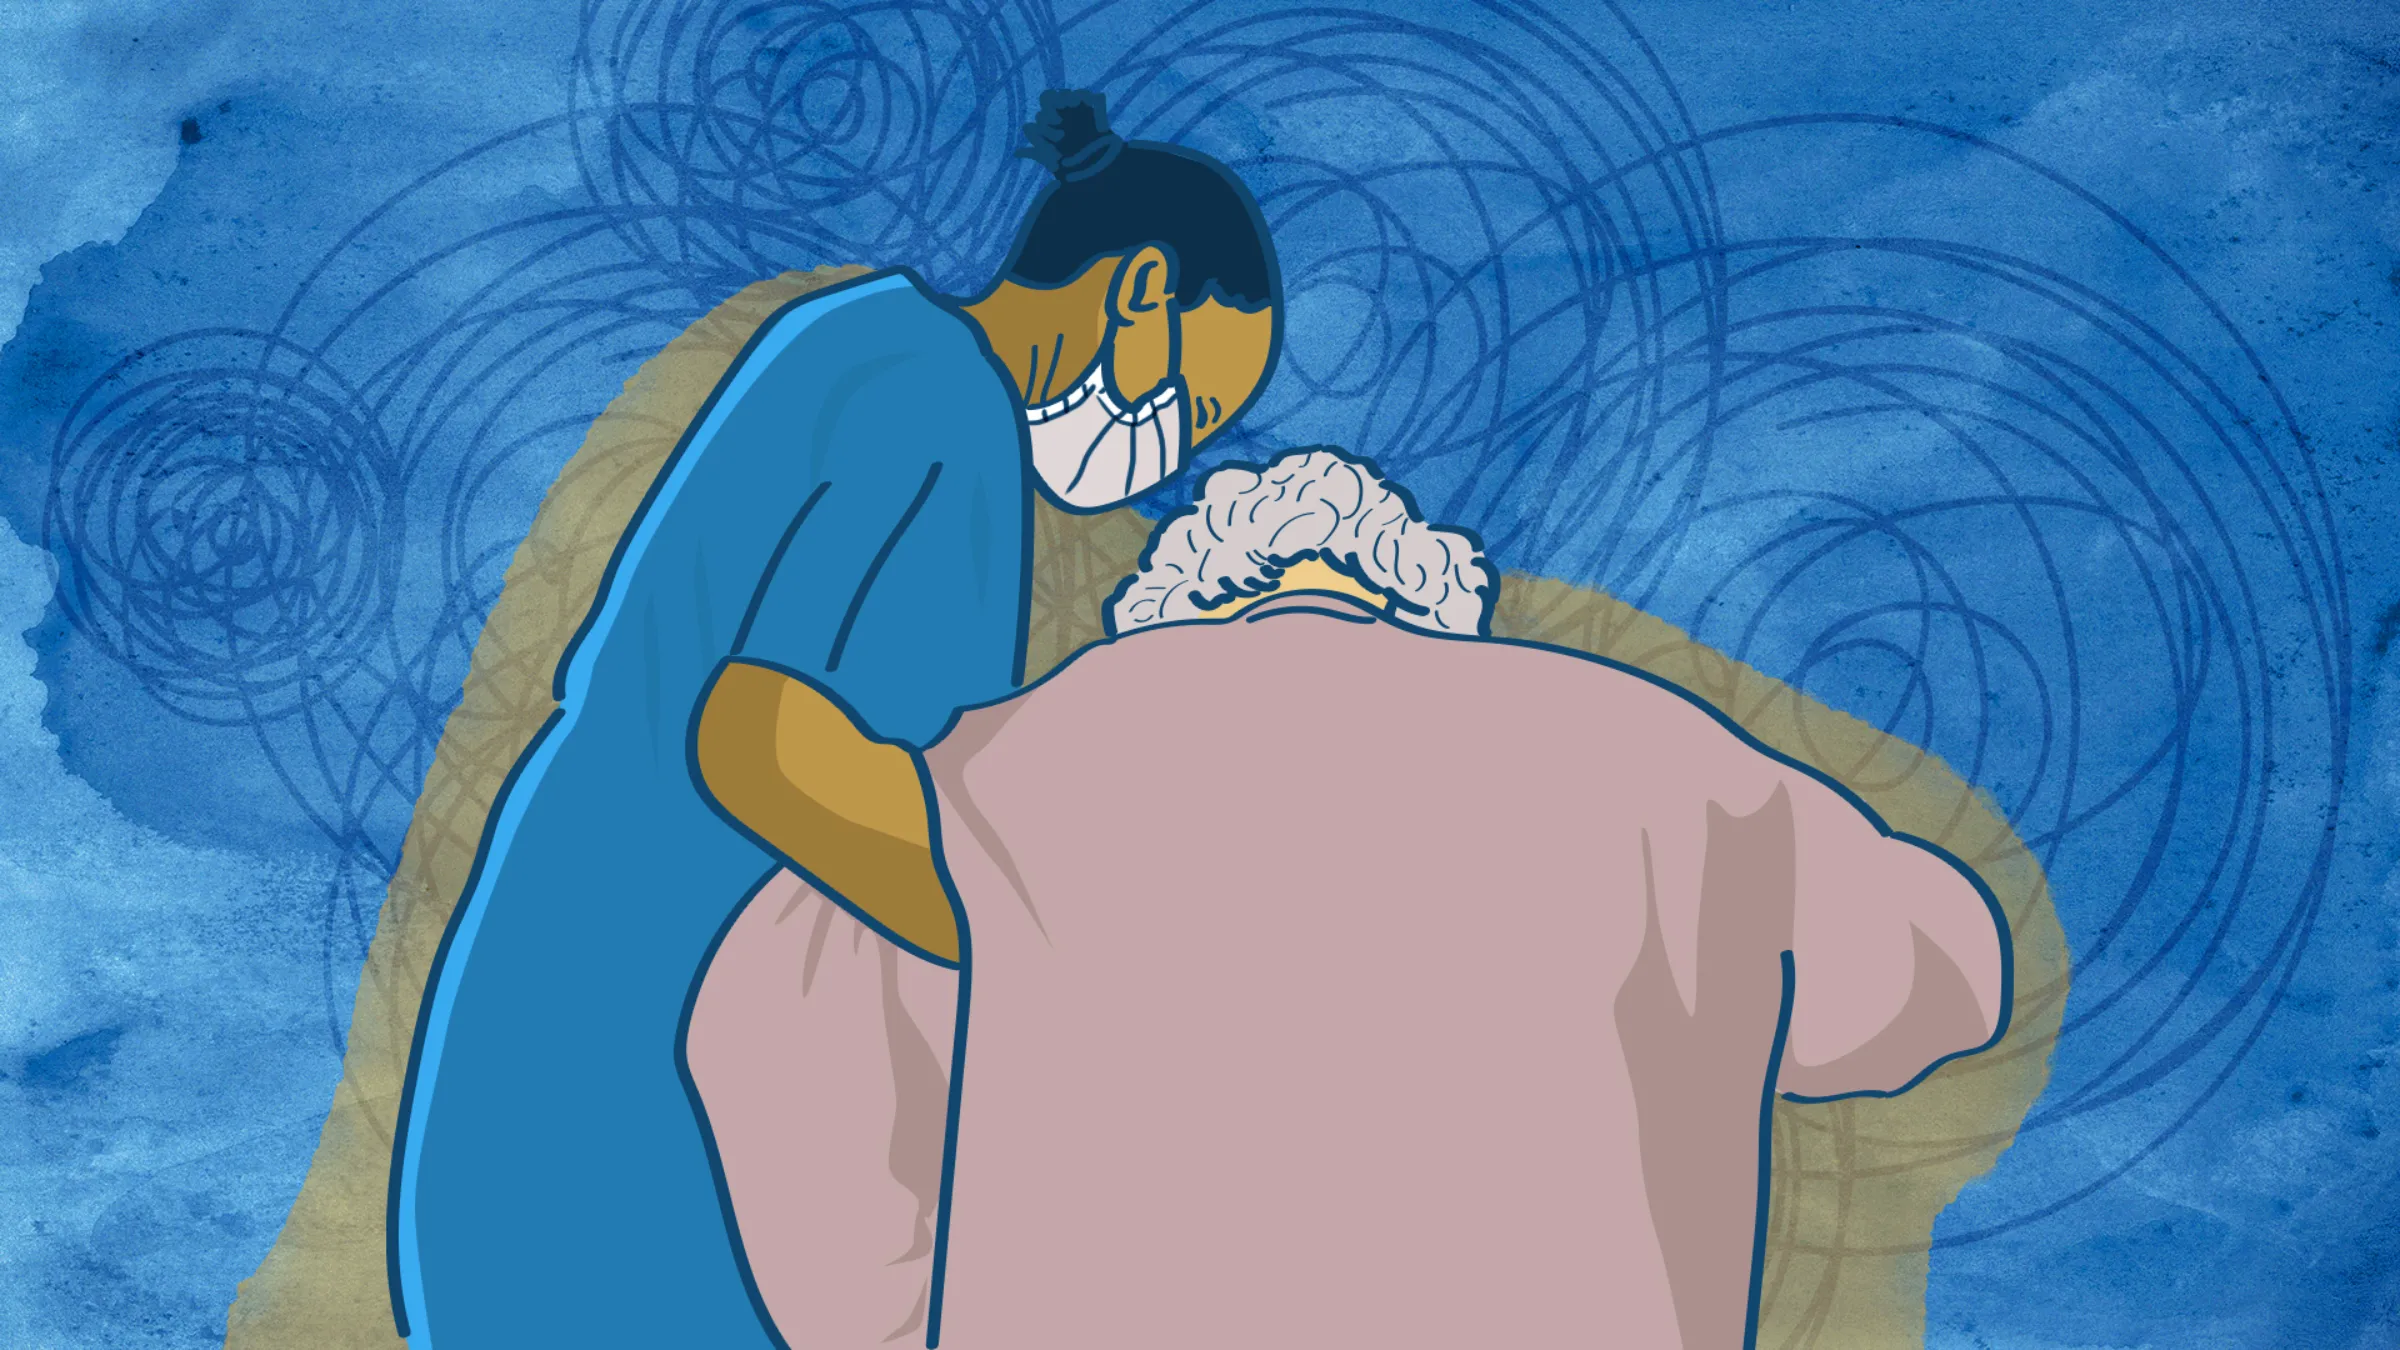 An illustration showing an elderly person from the back, with a side-on view of a carer who is holding the patient under the arm and helping them to walk.